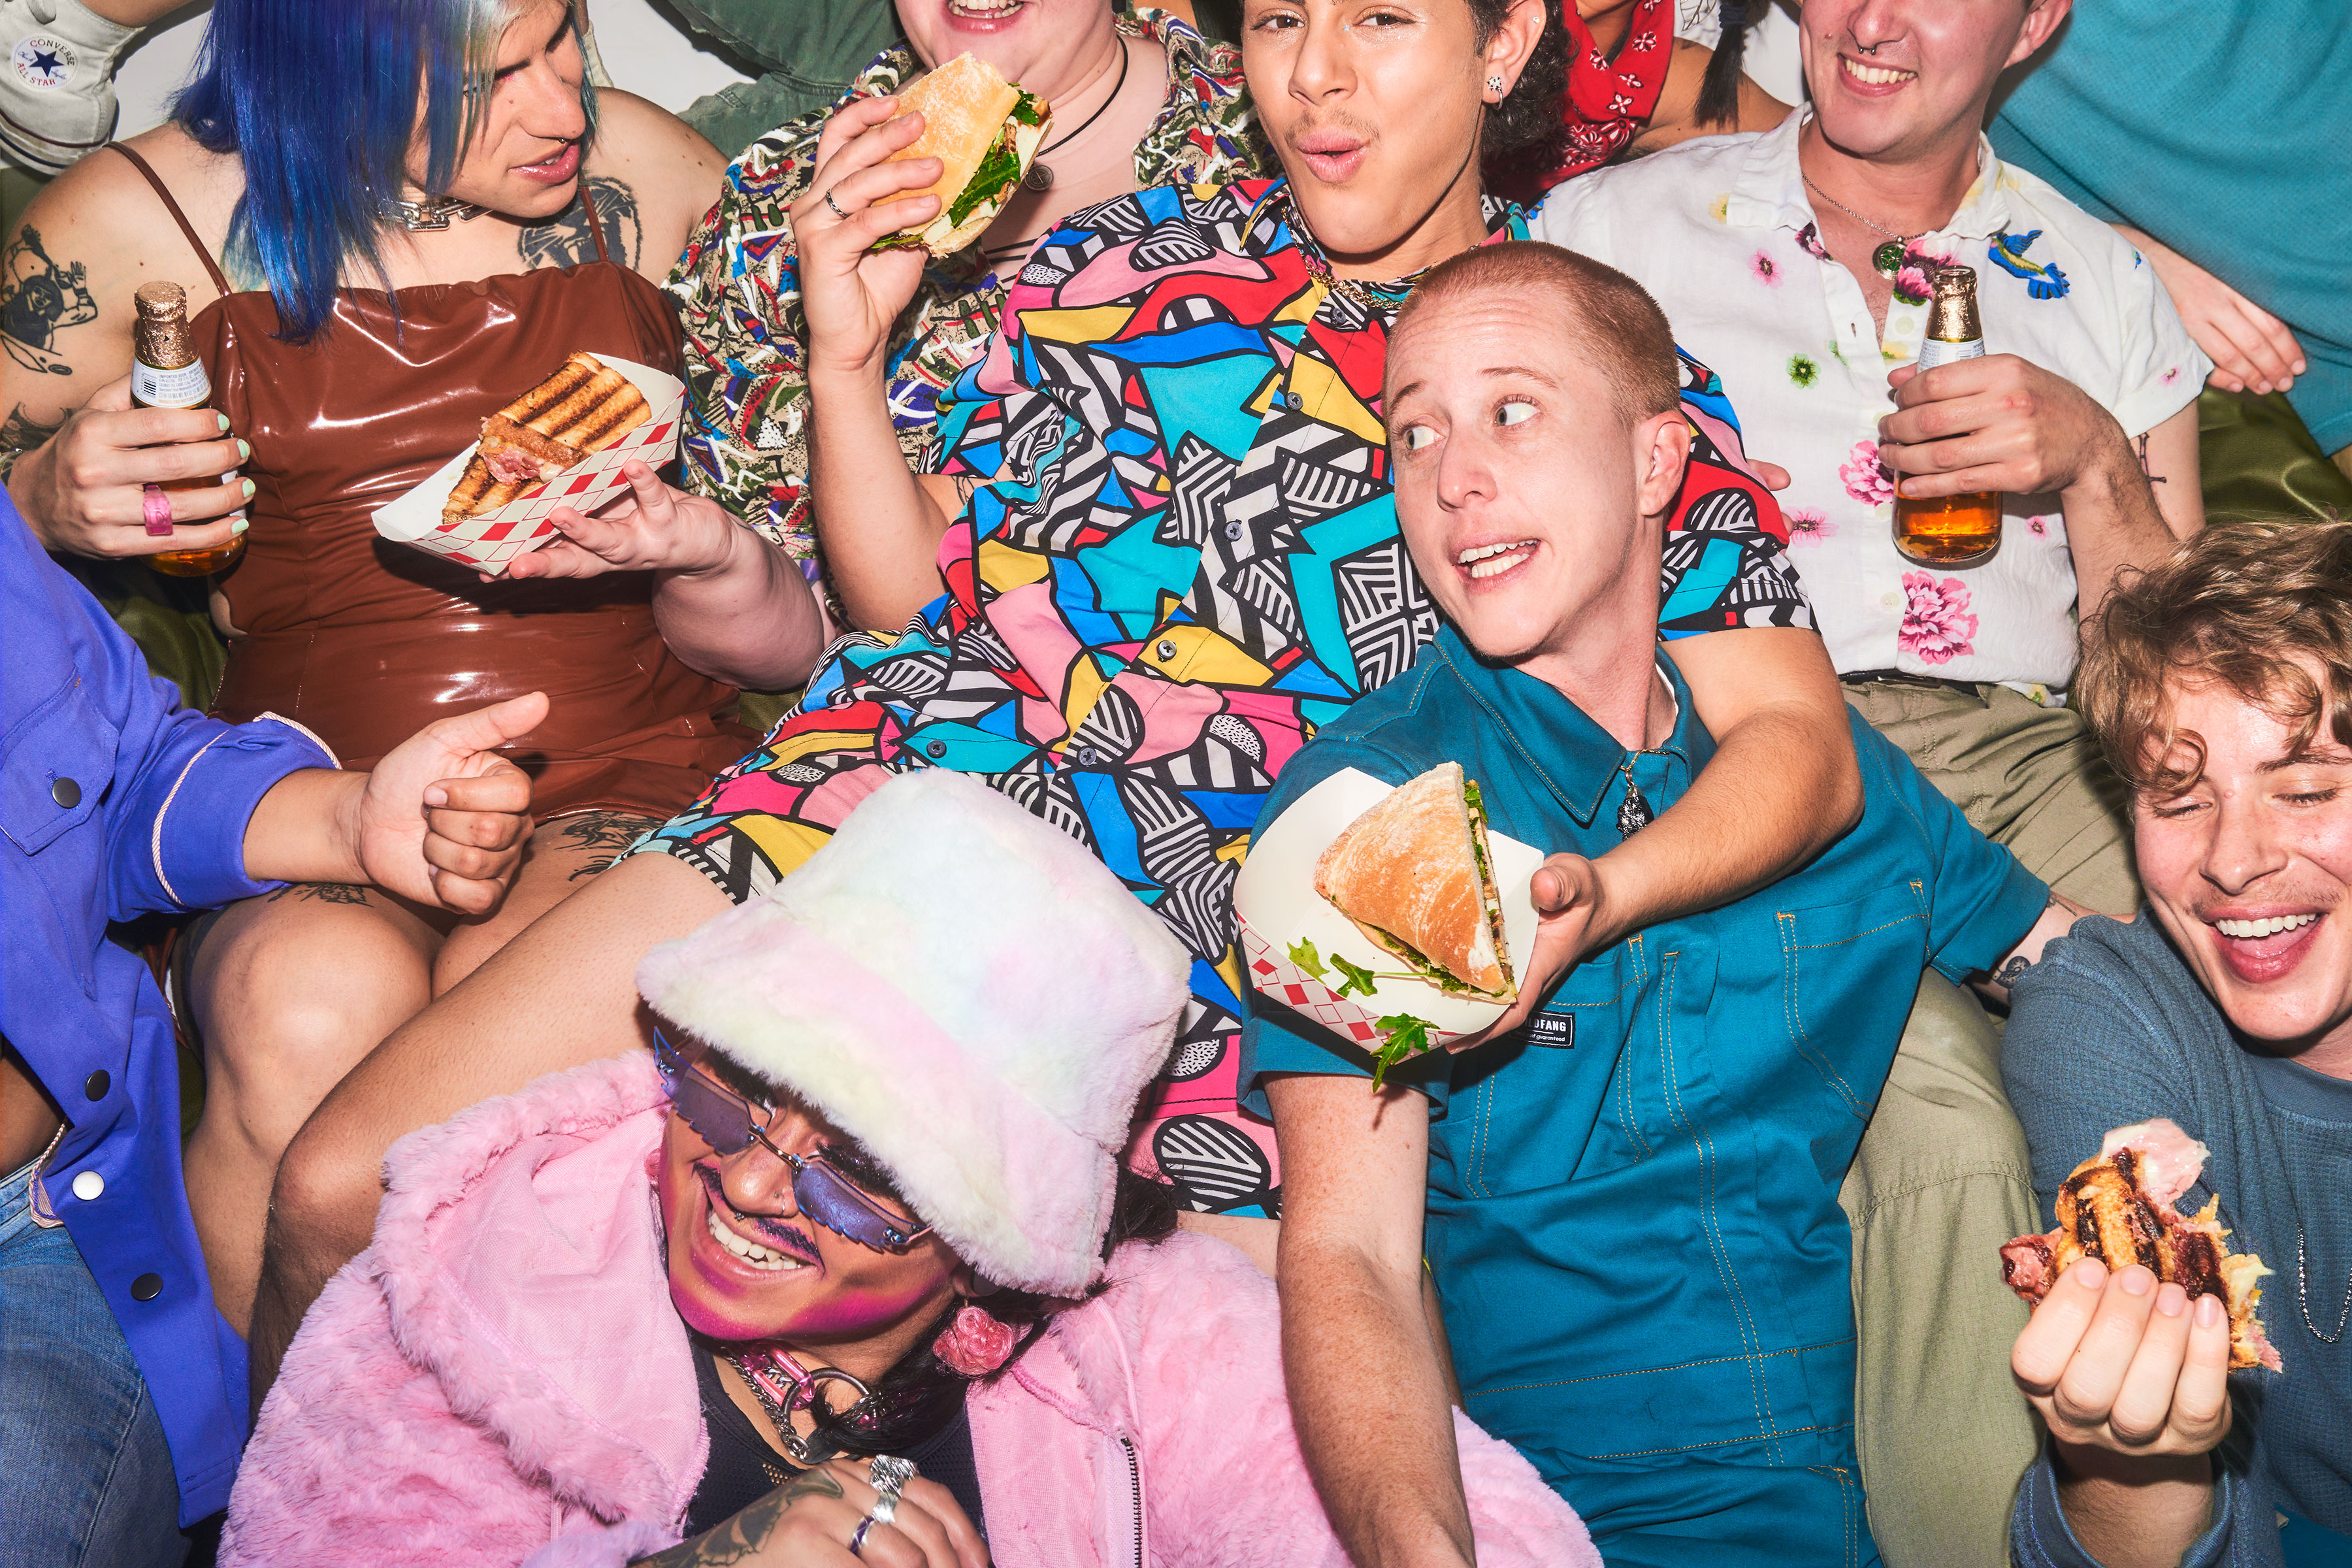 A group of people at a Slutty Sammys pop-up with sandwiches and beer.